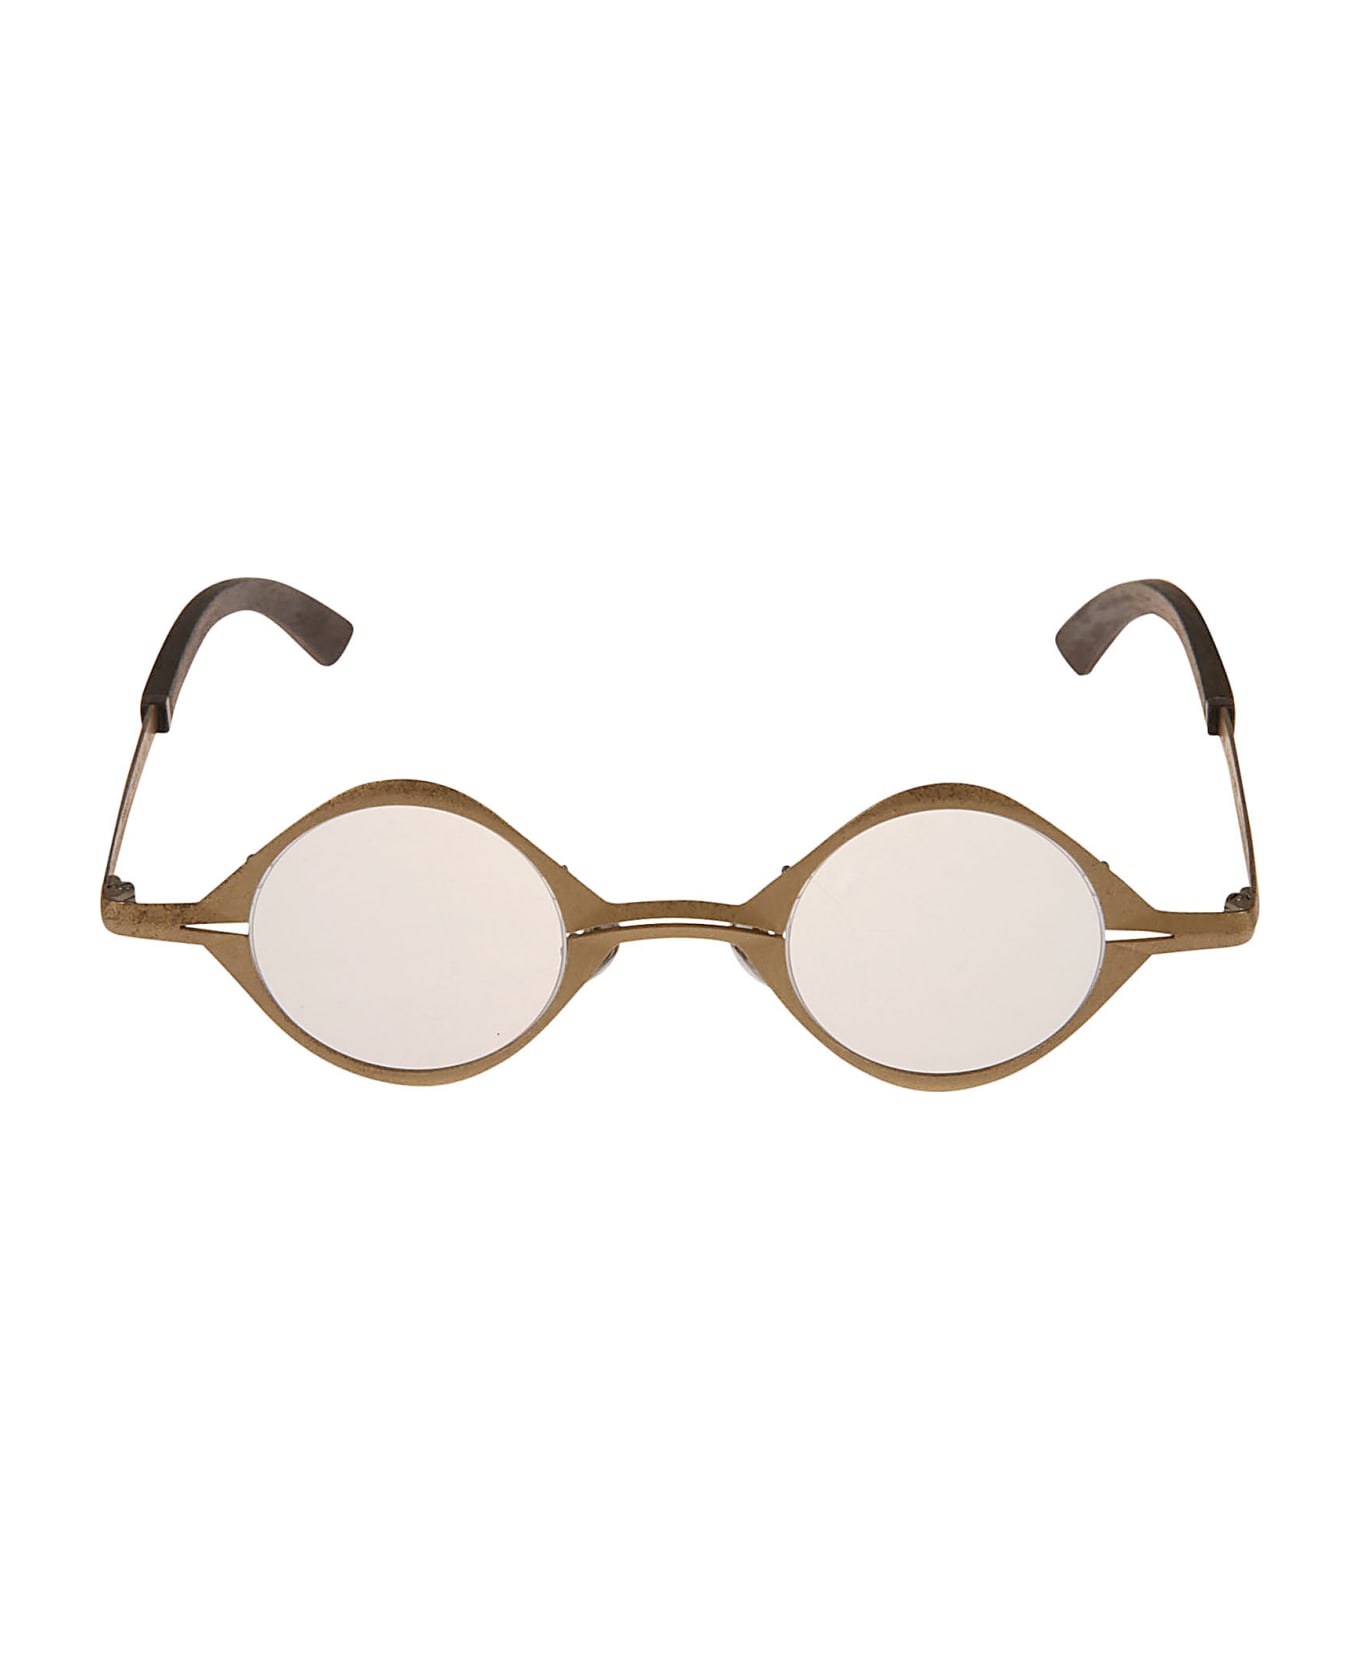 RIGARDS Leather Detail Round Glasses - Gold アイウェア